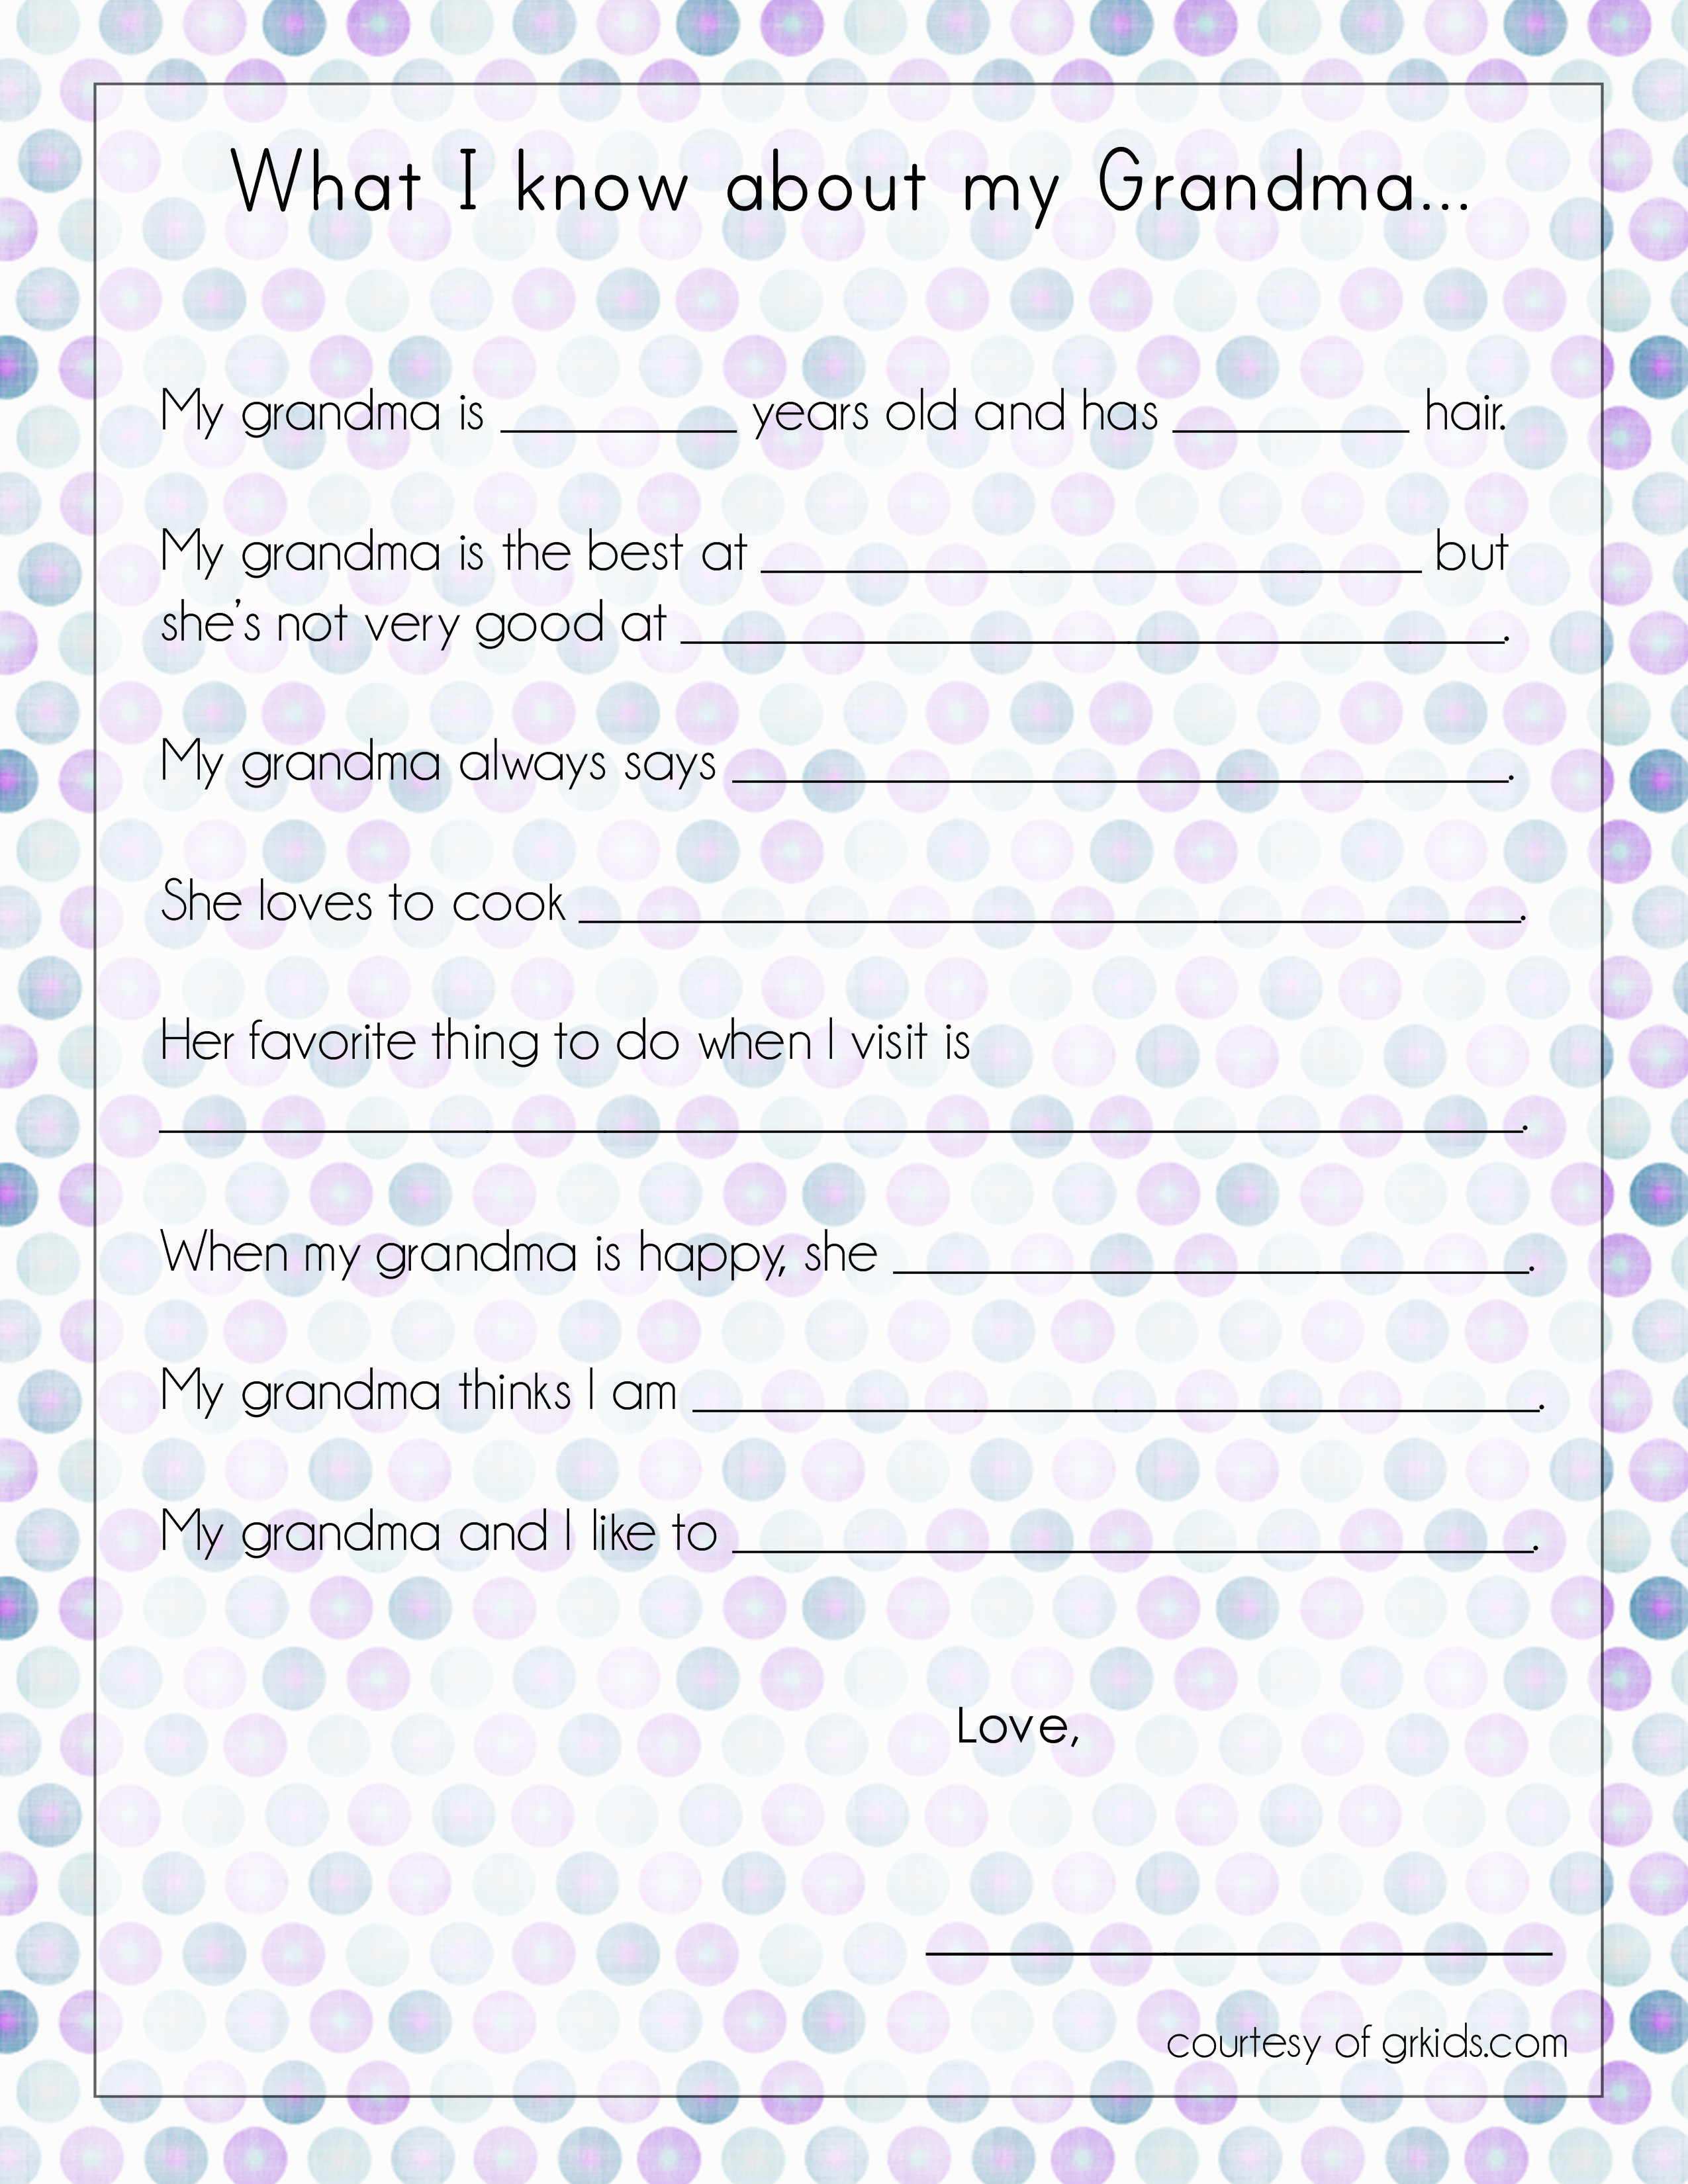 9 Best Images of My Grandma Printables All About My Grandma